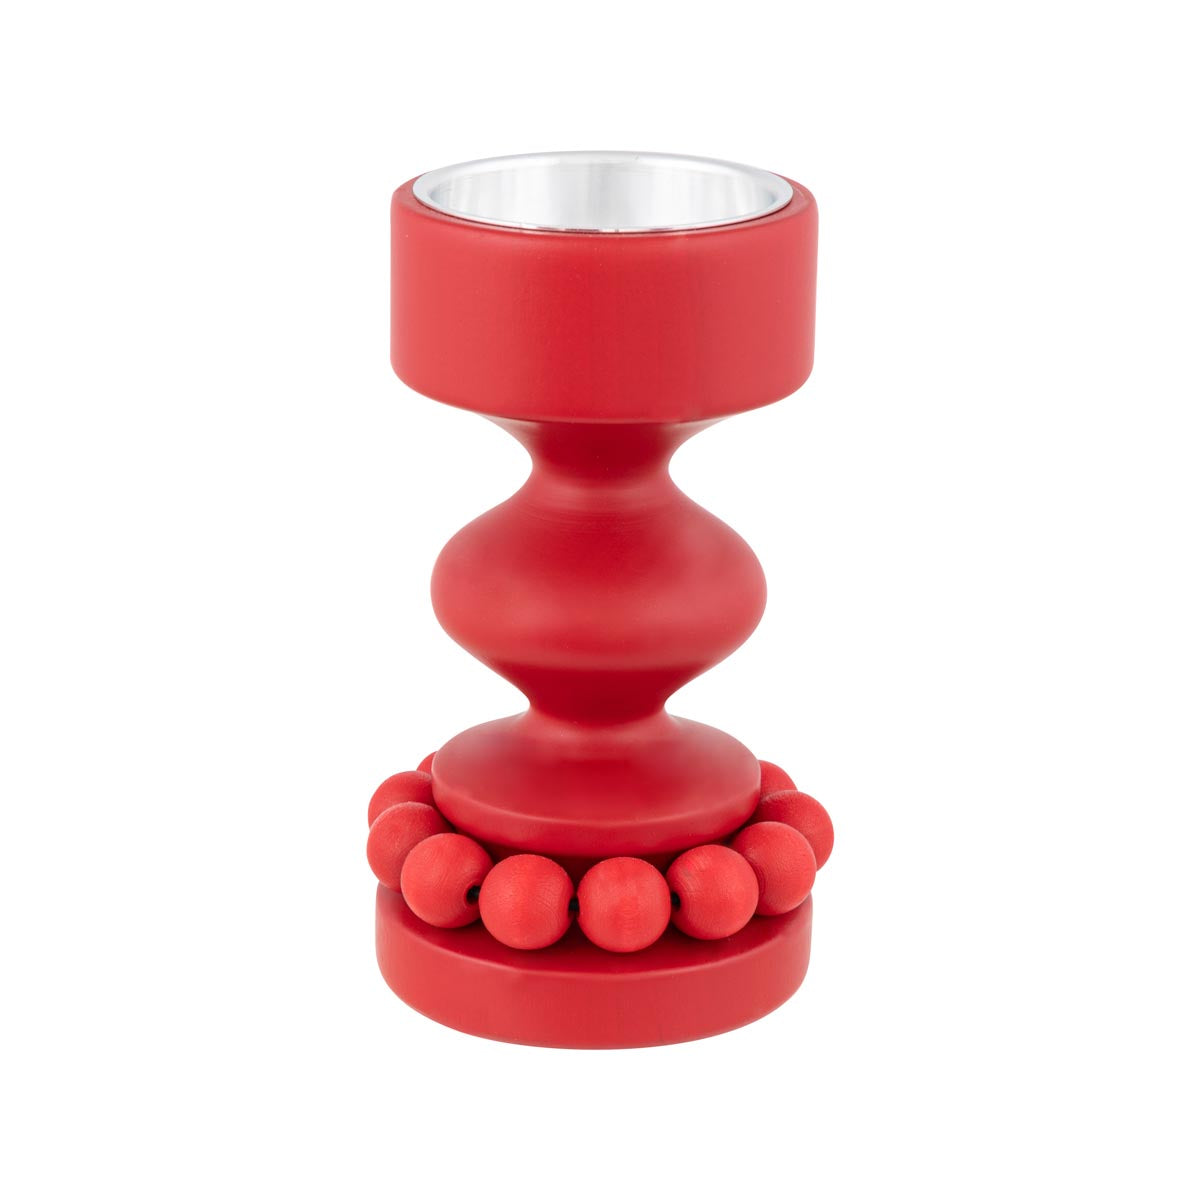 Prinssi candleholder, red